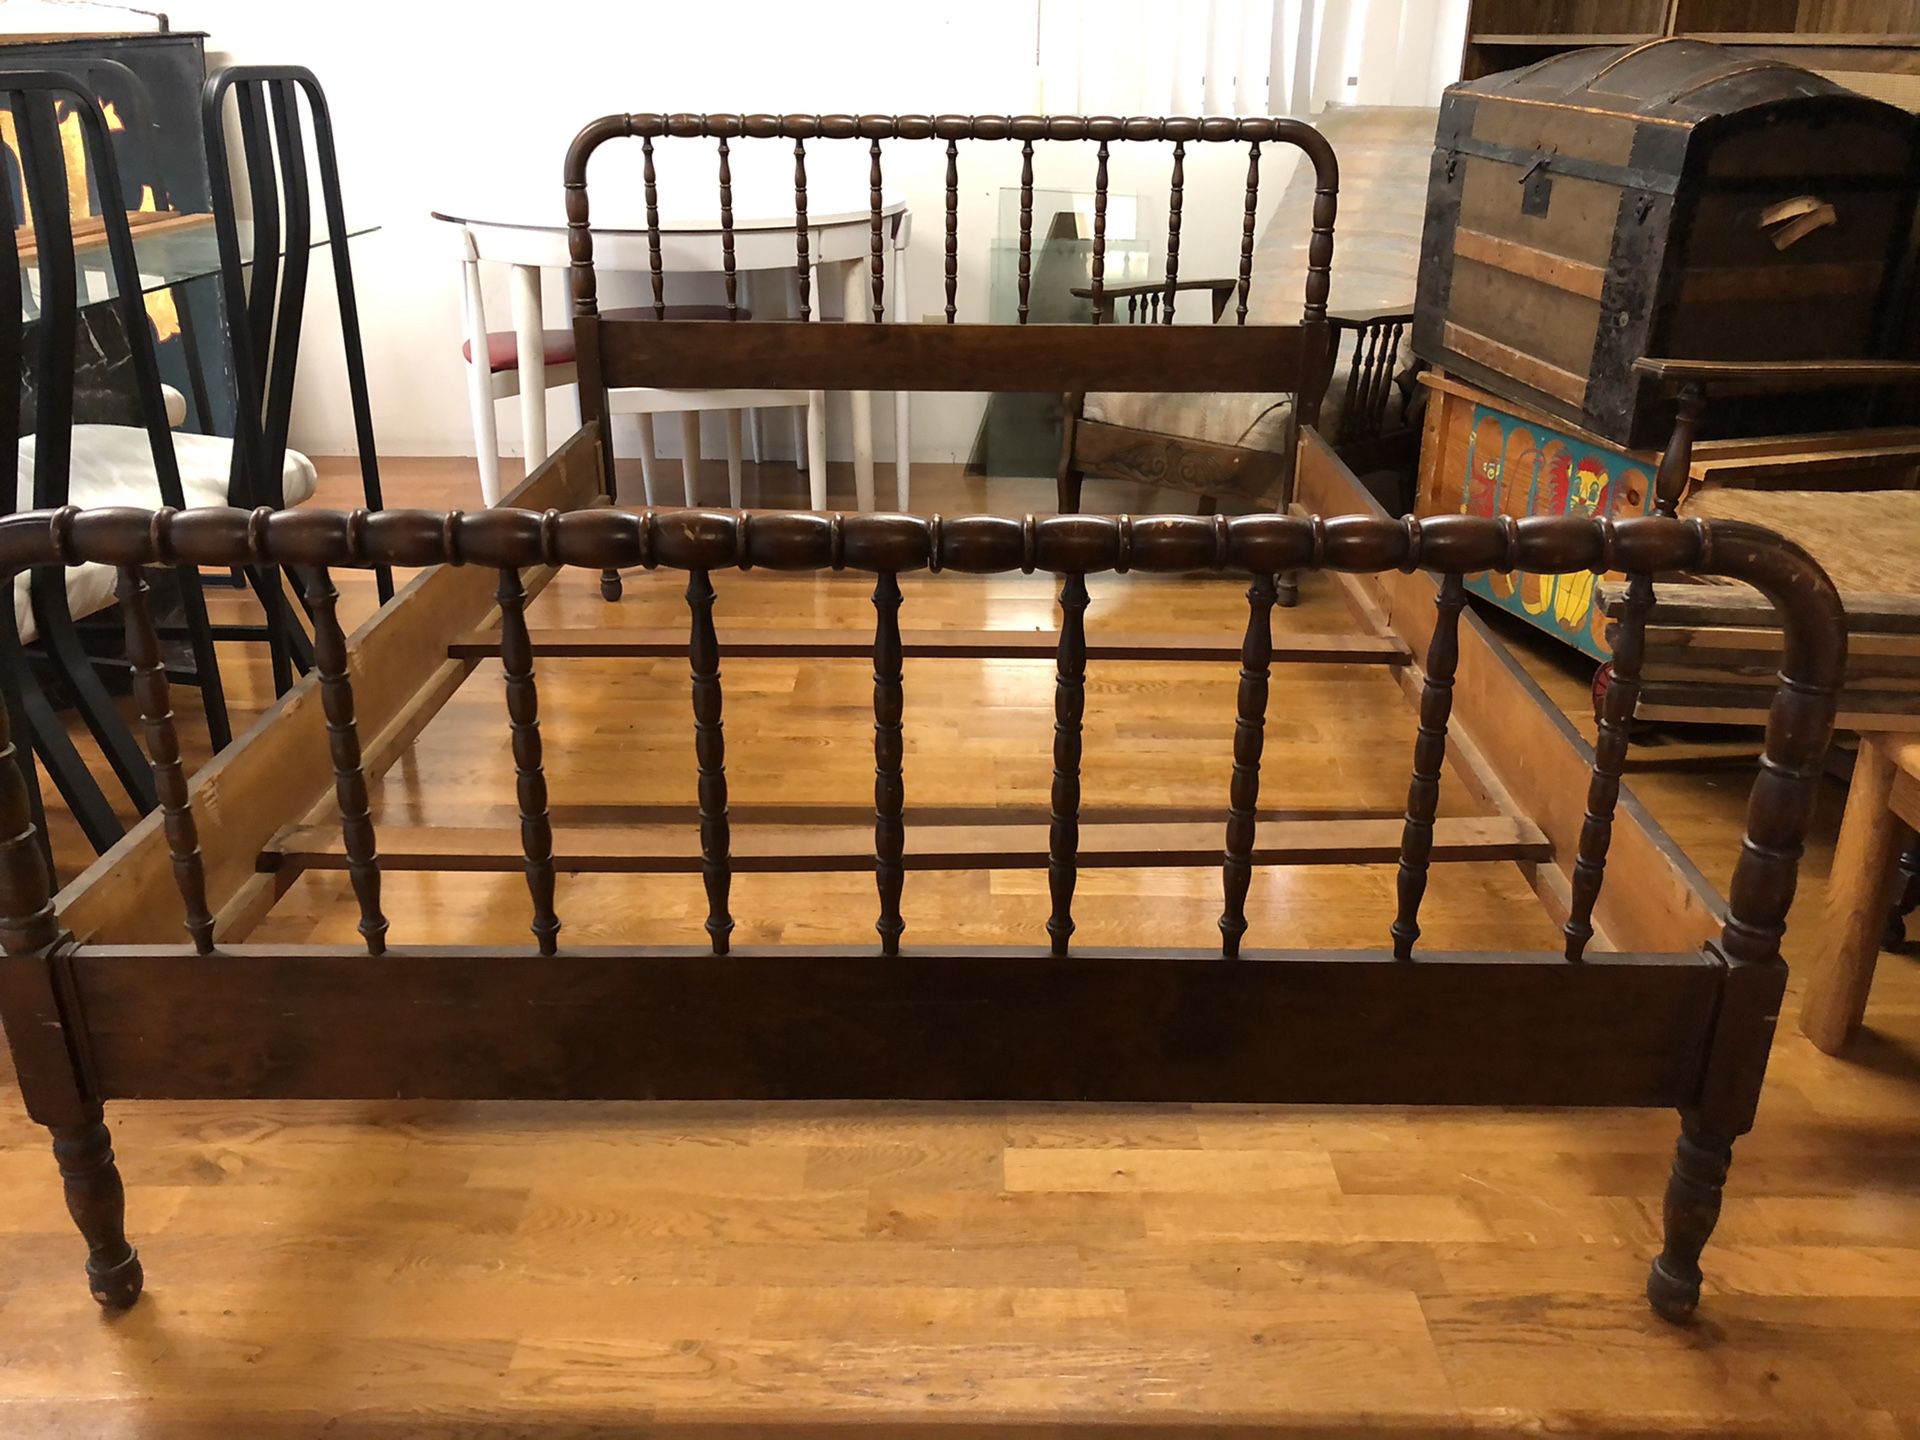 Antique Doernbecher Manufacturing company of Portland Cane style bed